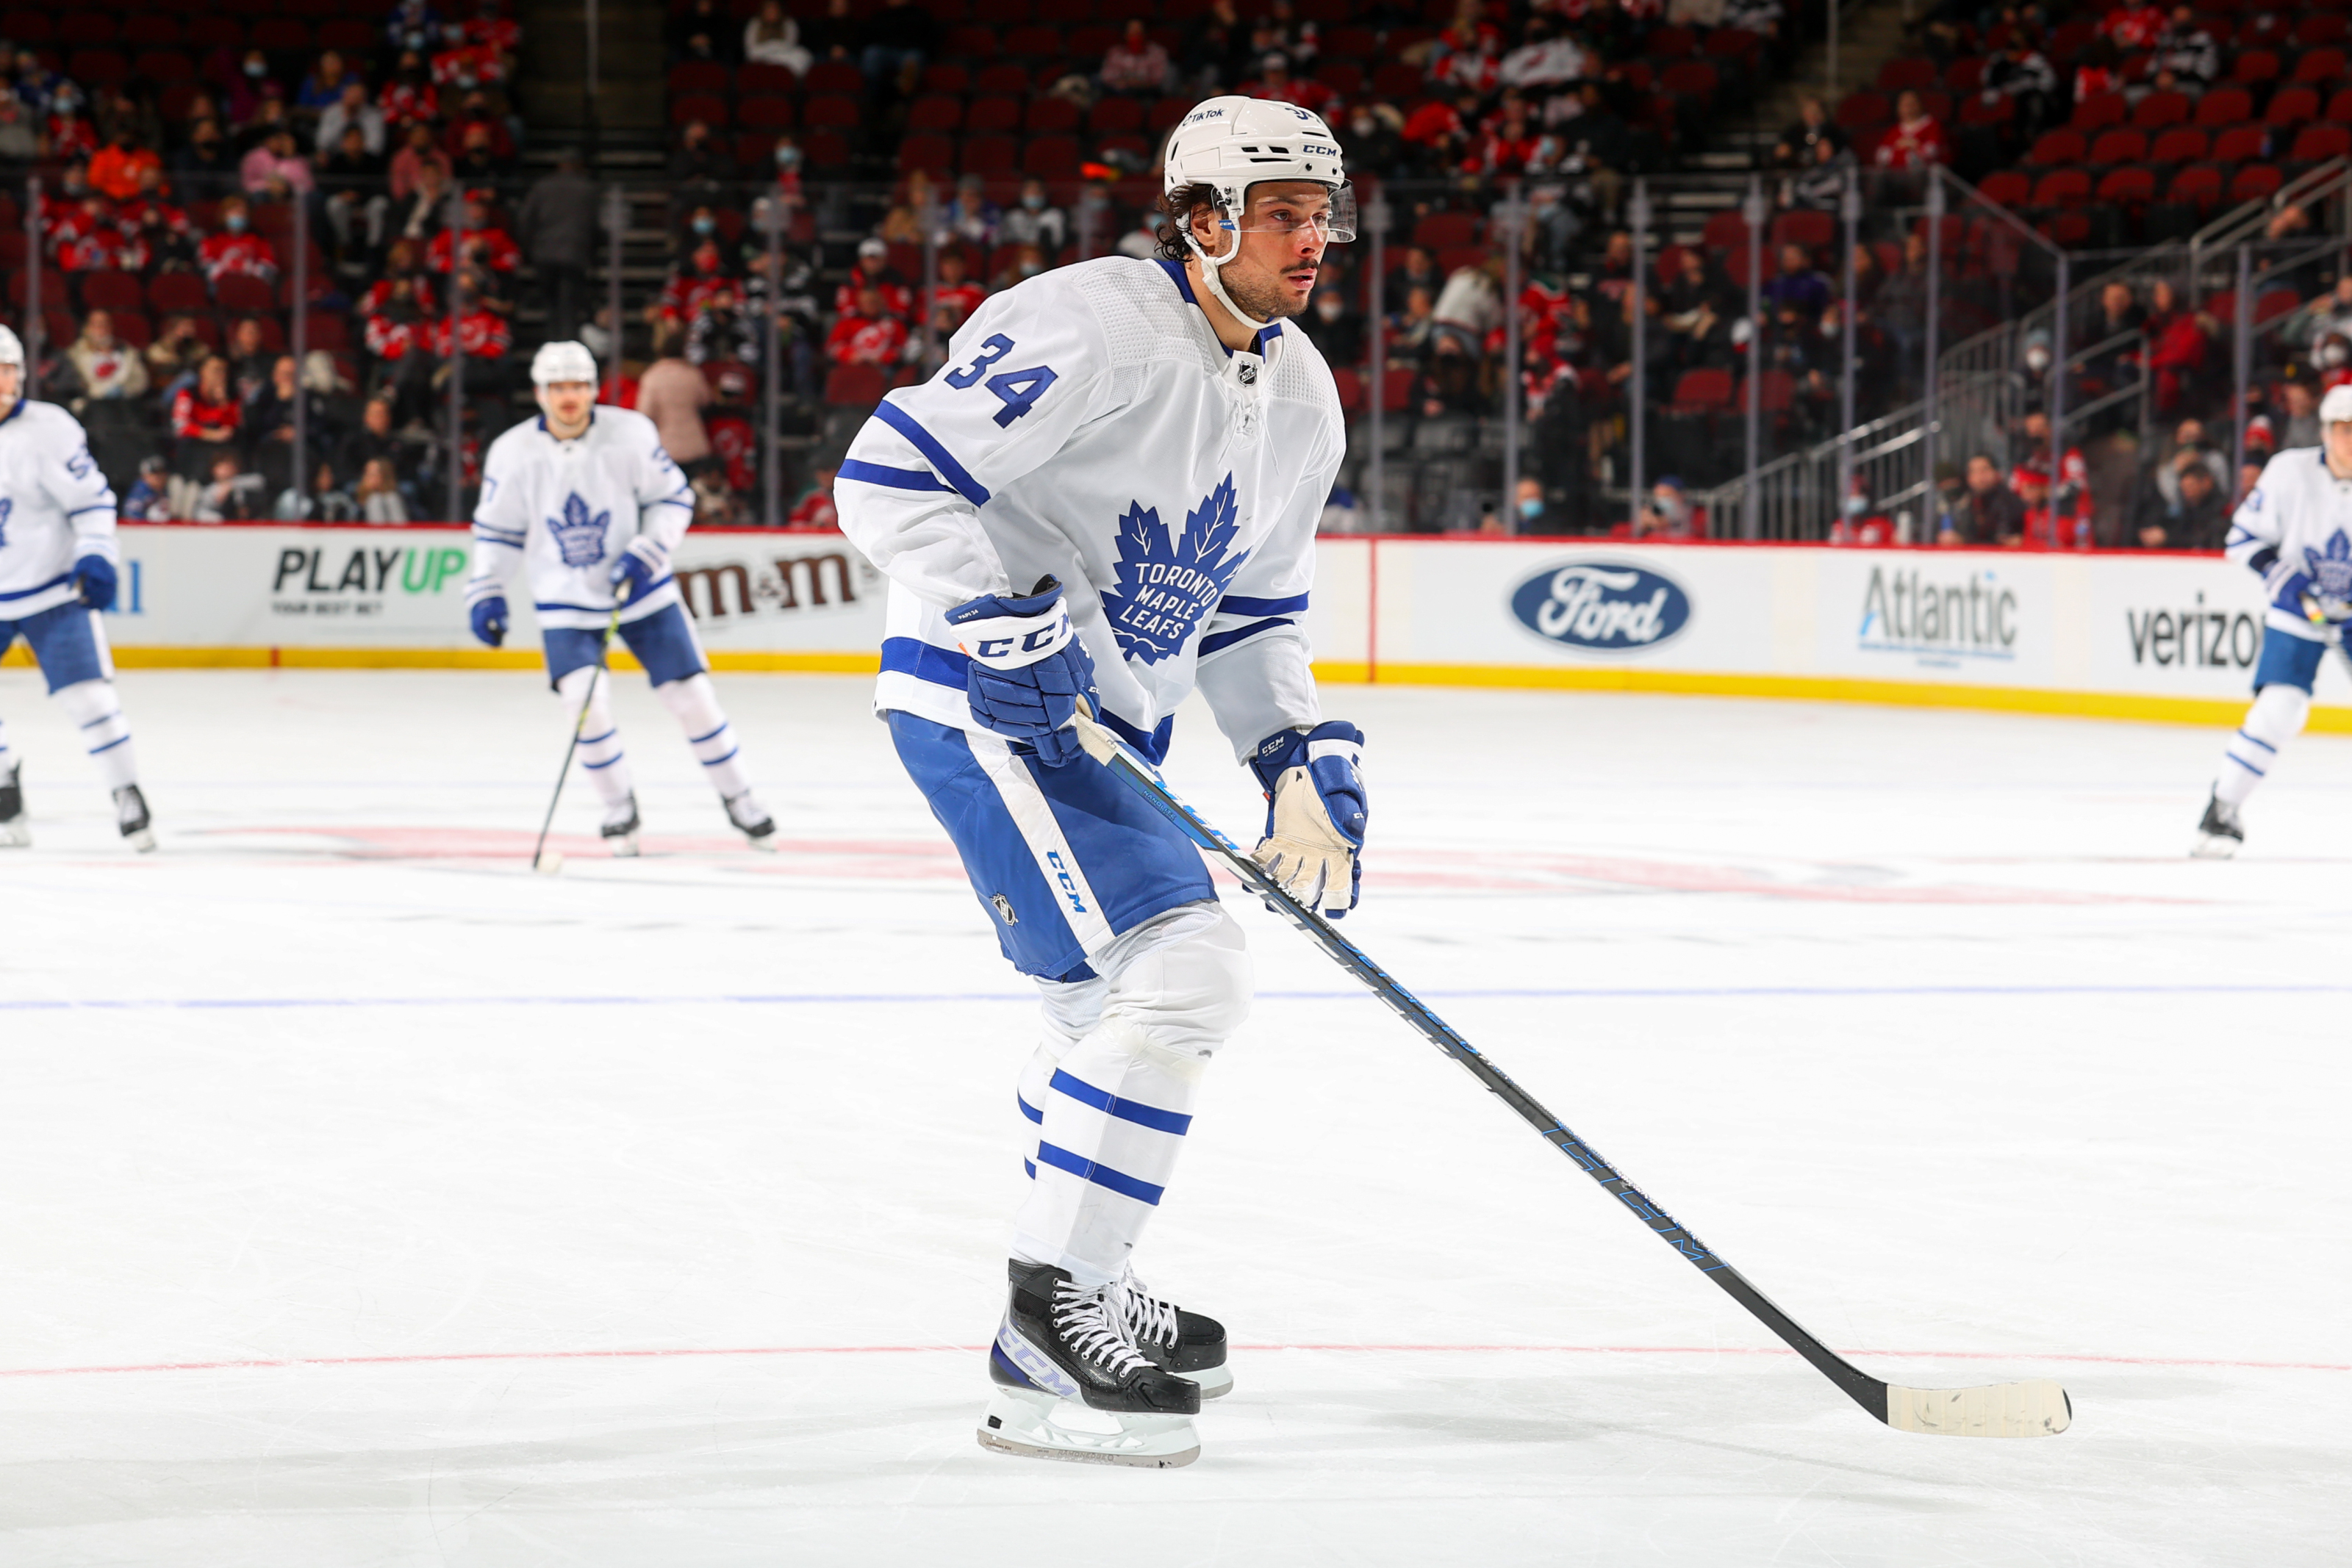 Auston Matthews will miss his 1st Maple Leafs' game due to injury